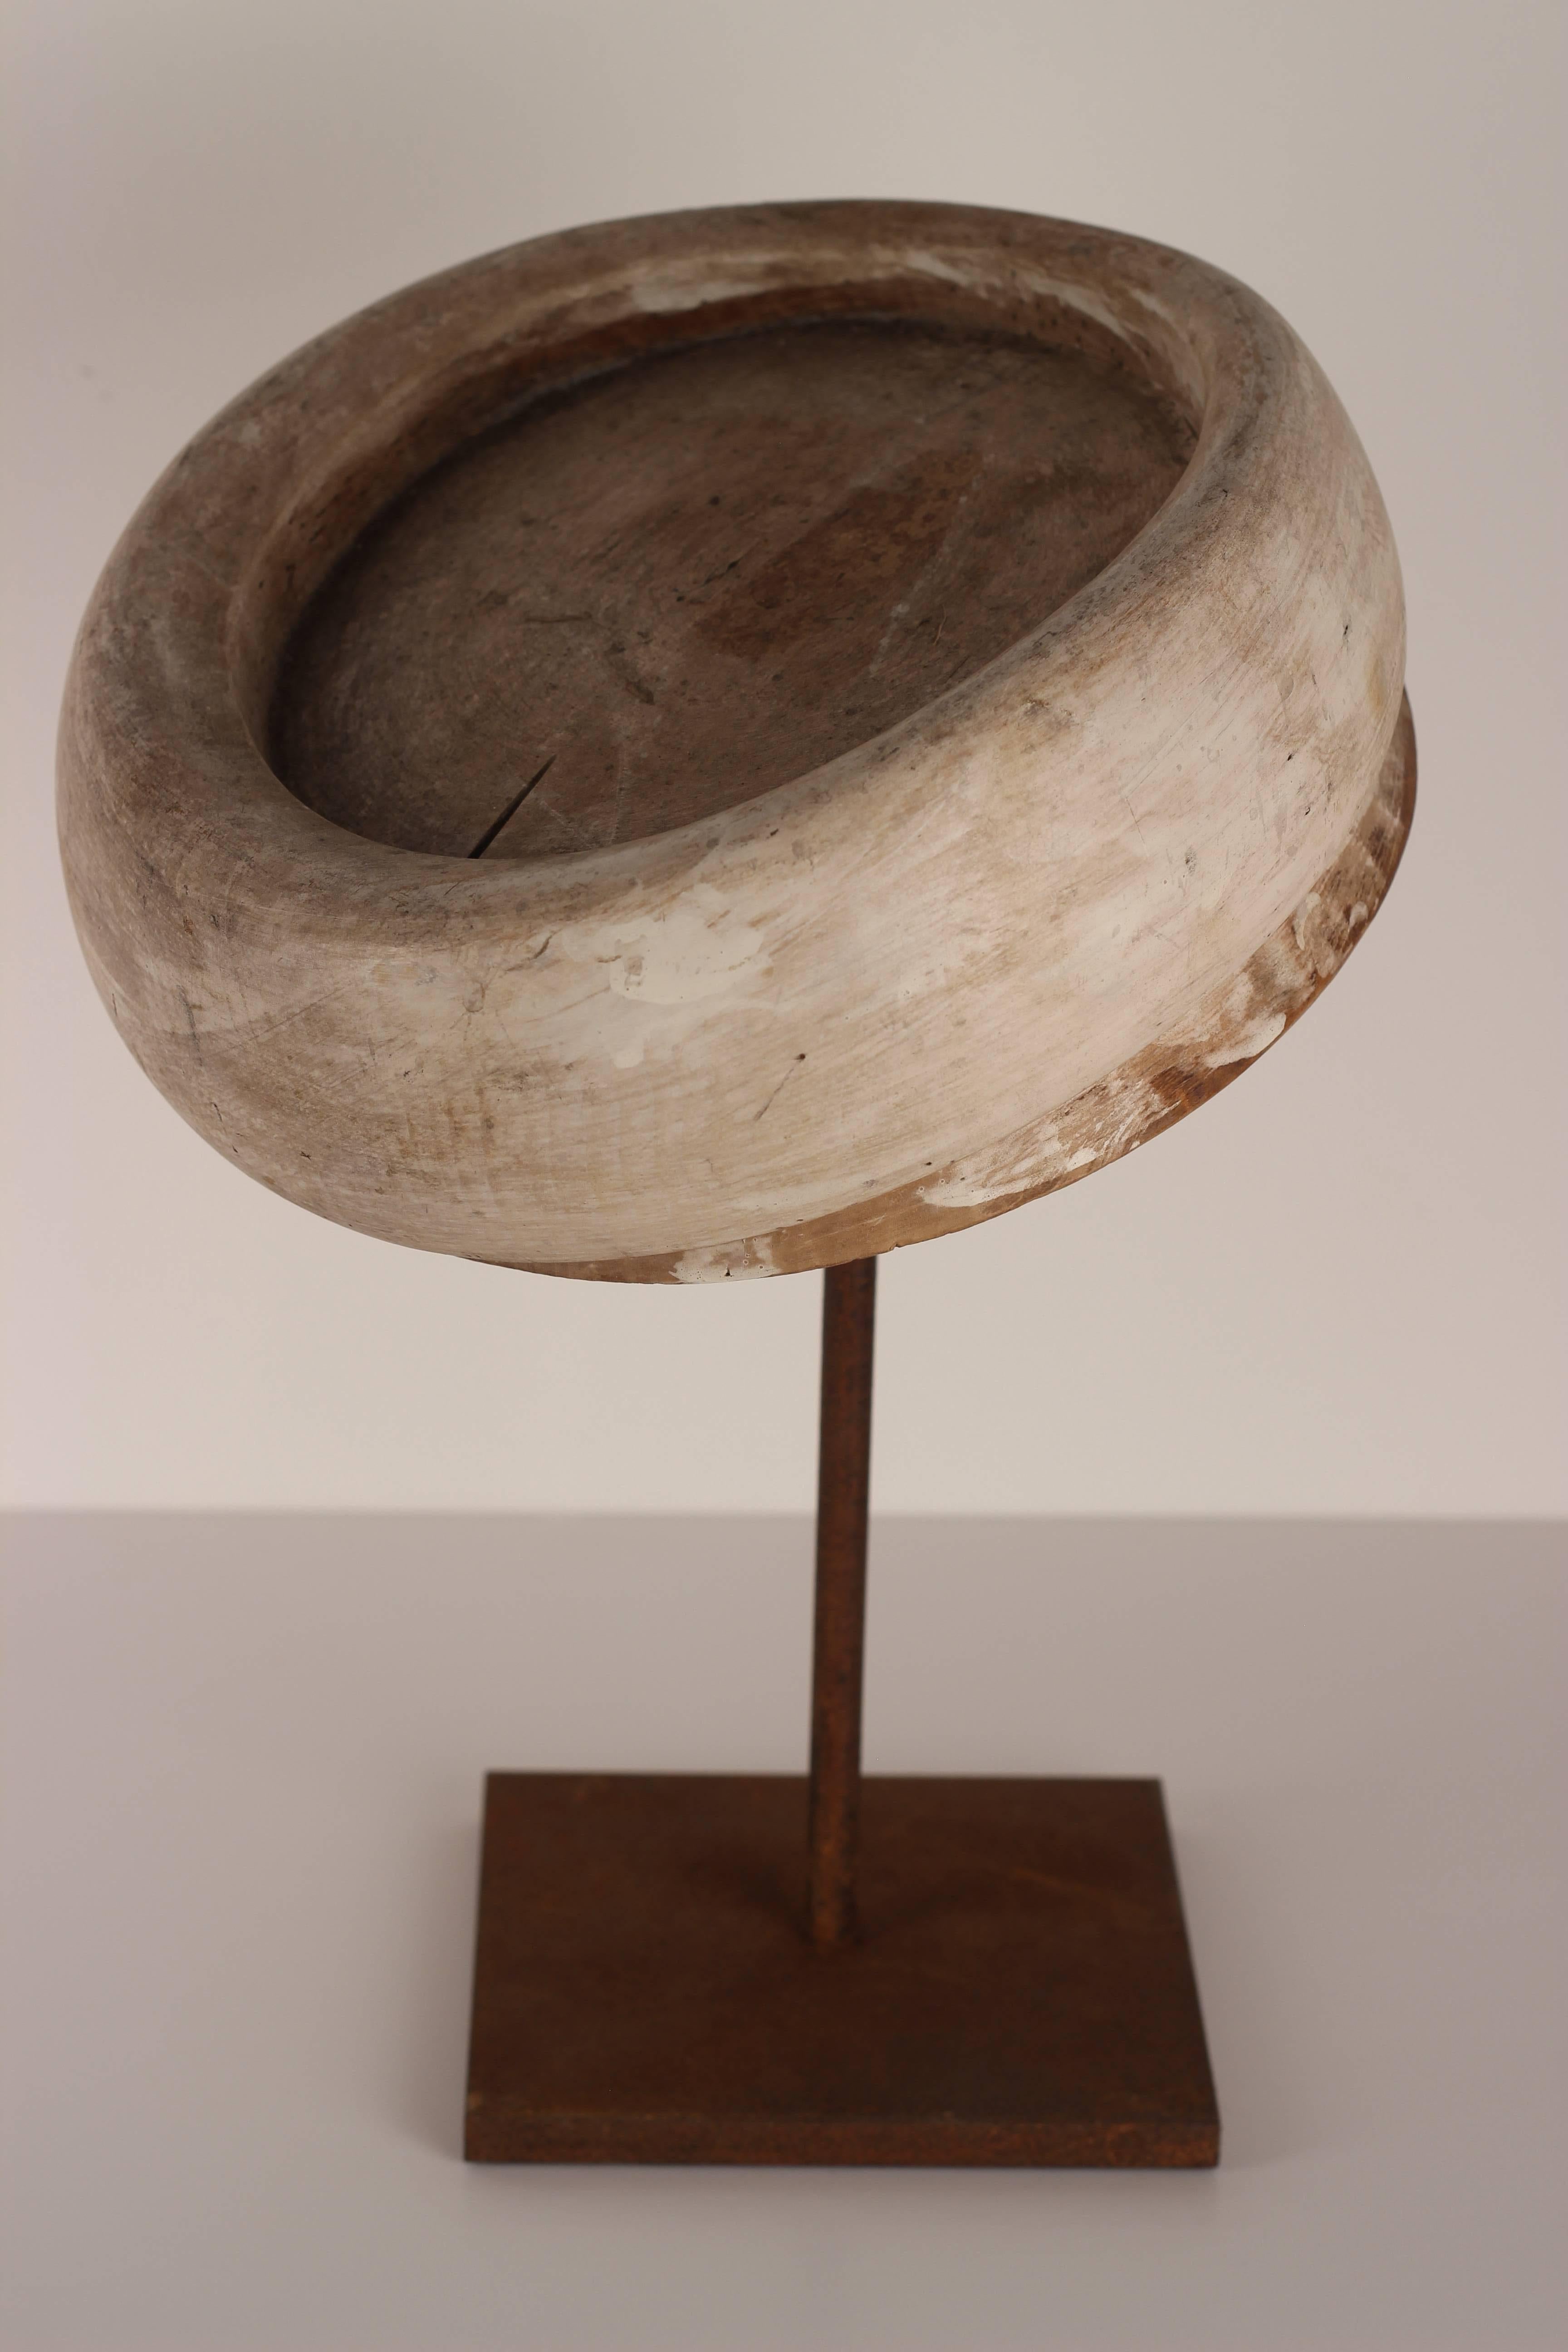 One of a collection of hat blocks from the well-known Milliners of Florence. This example is mounted on an oxidized display stand.